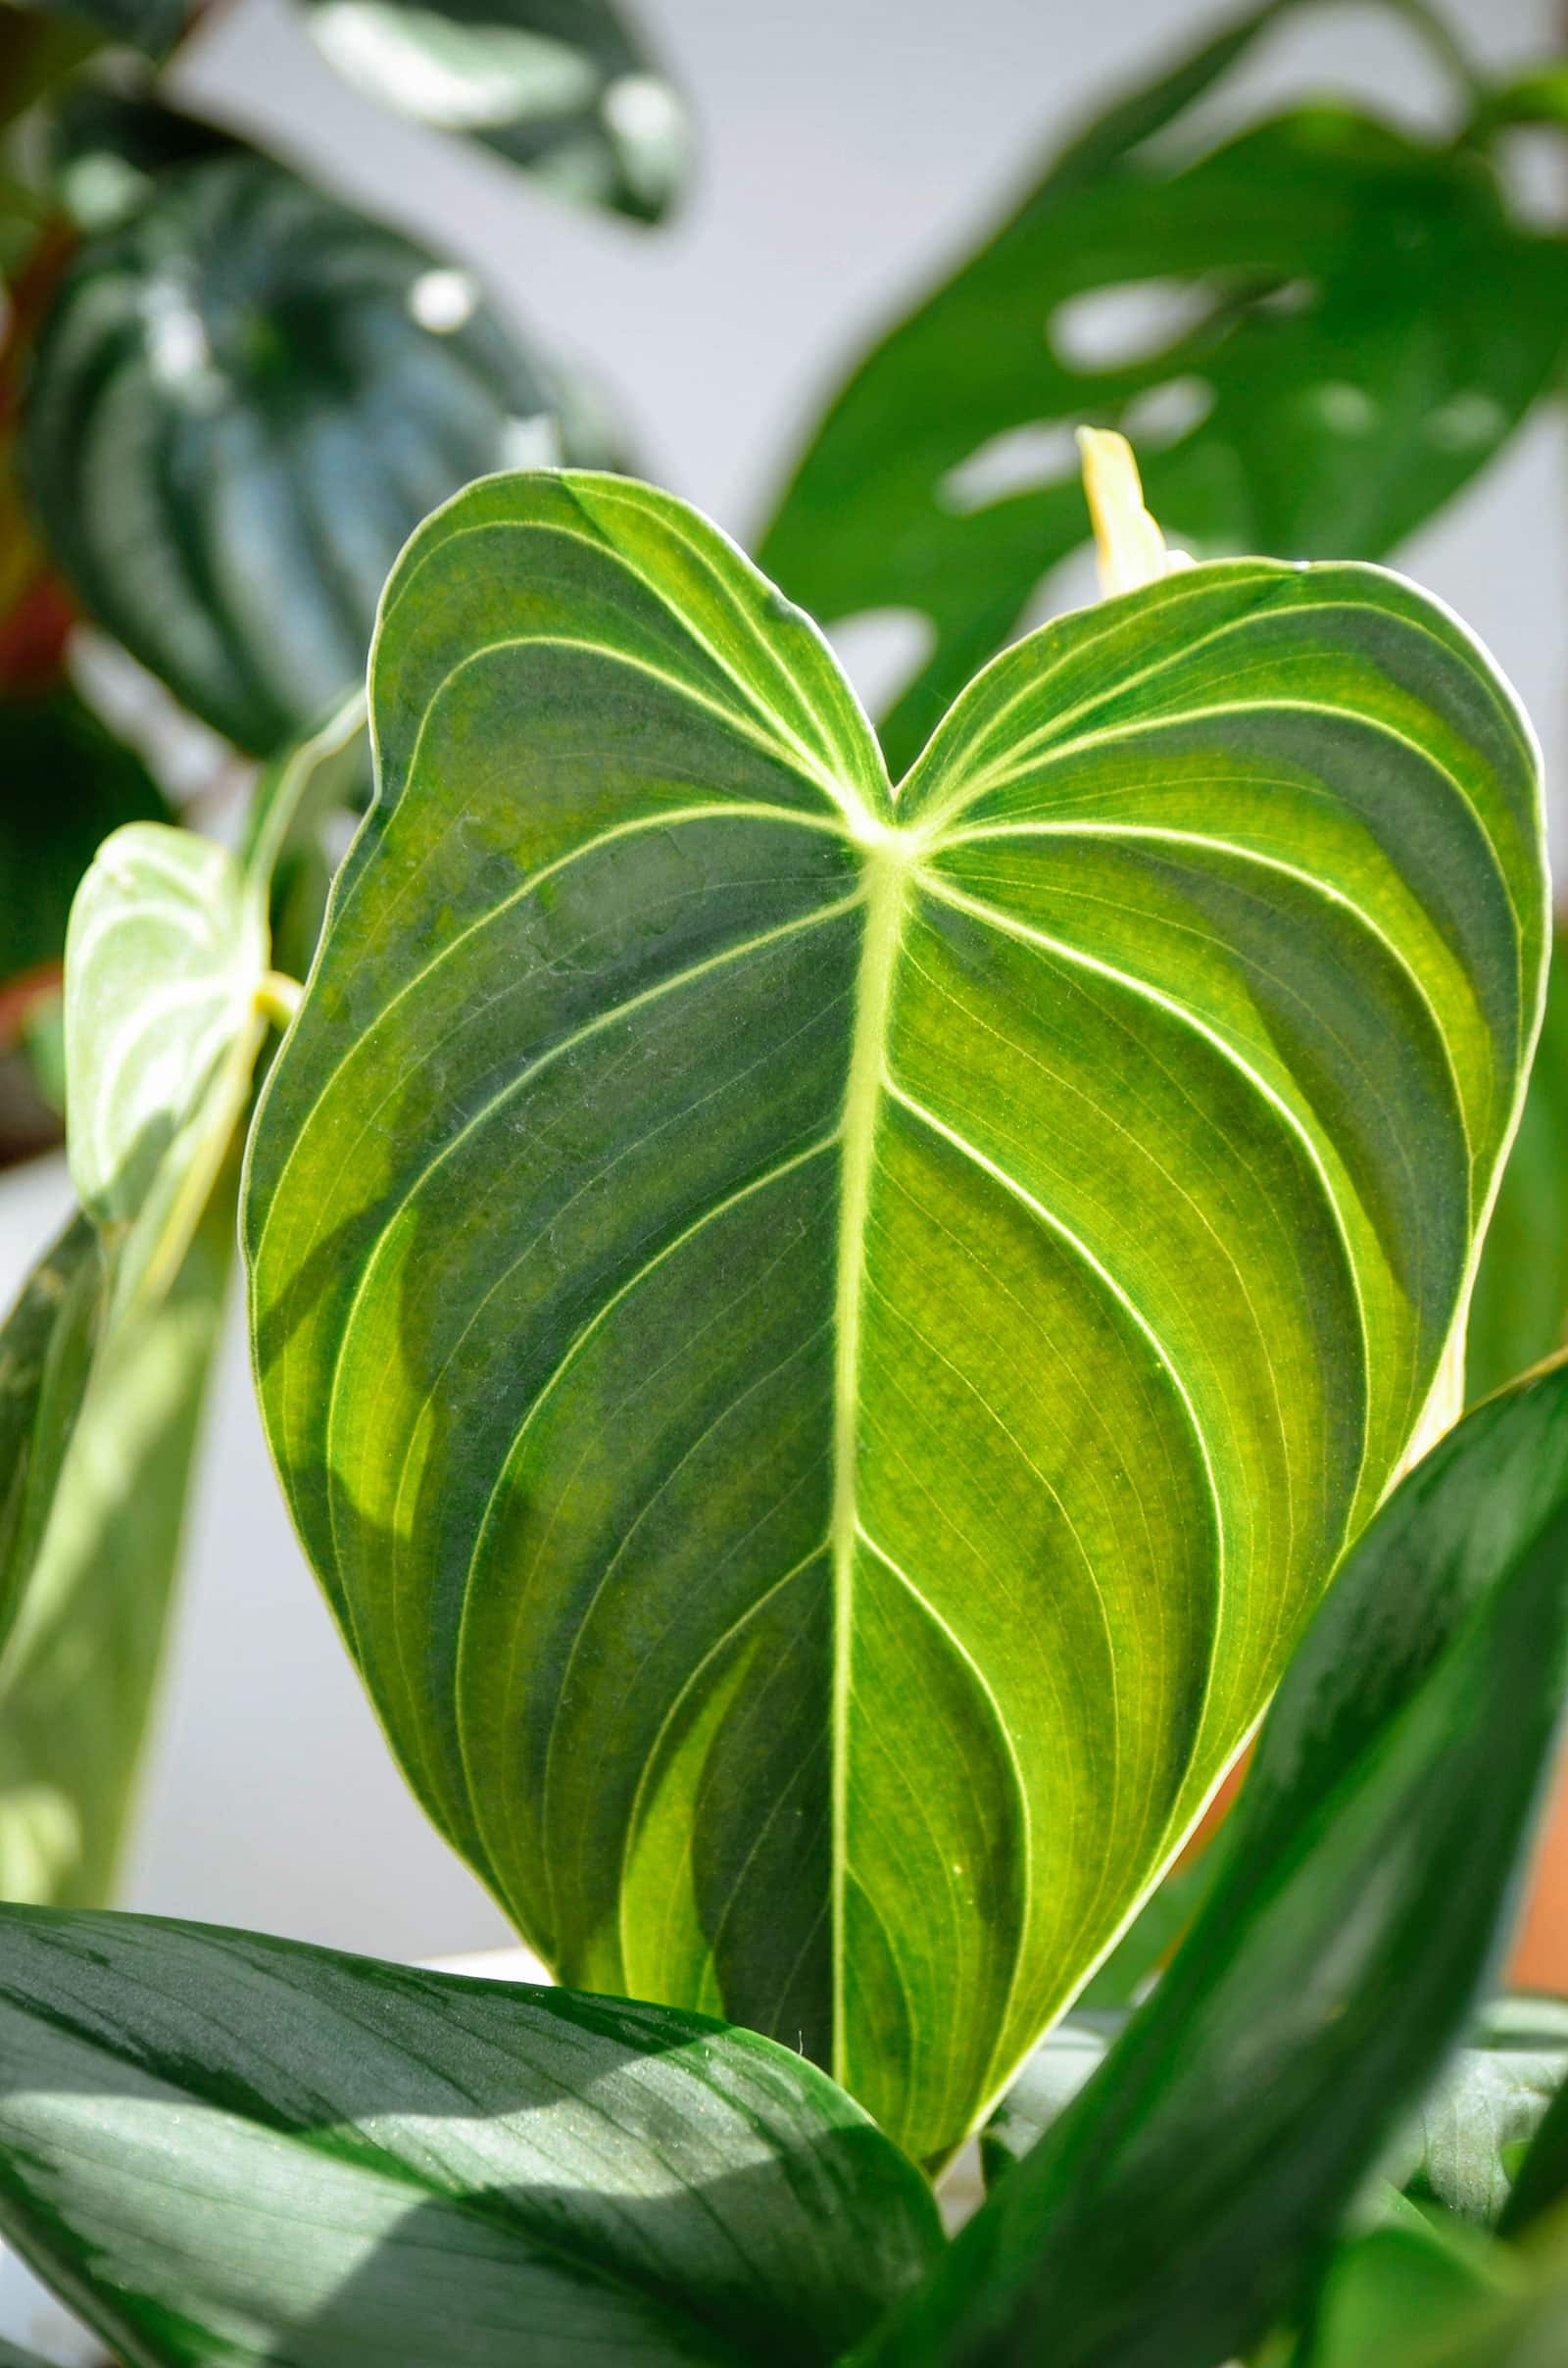 Sunlight shining through a Philodendron melanochrysum leaf with other green foliage in the background